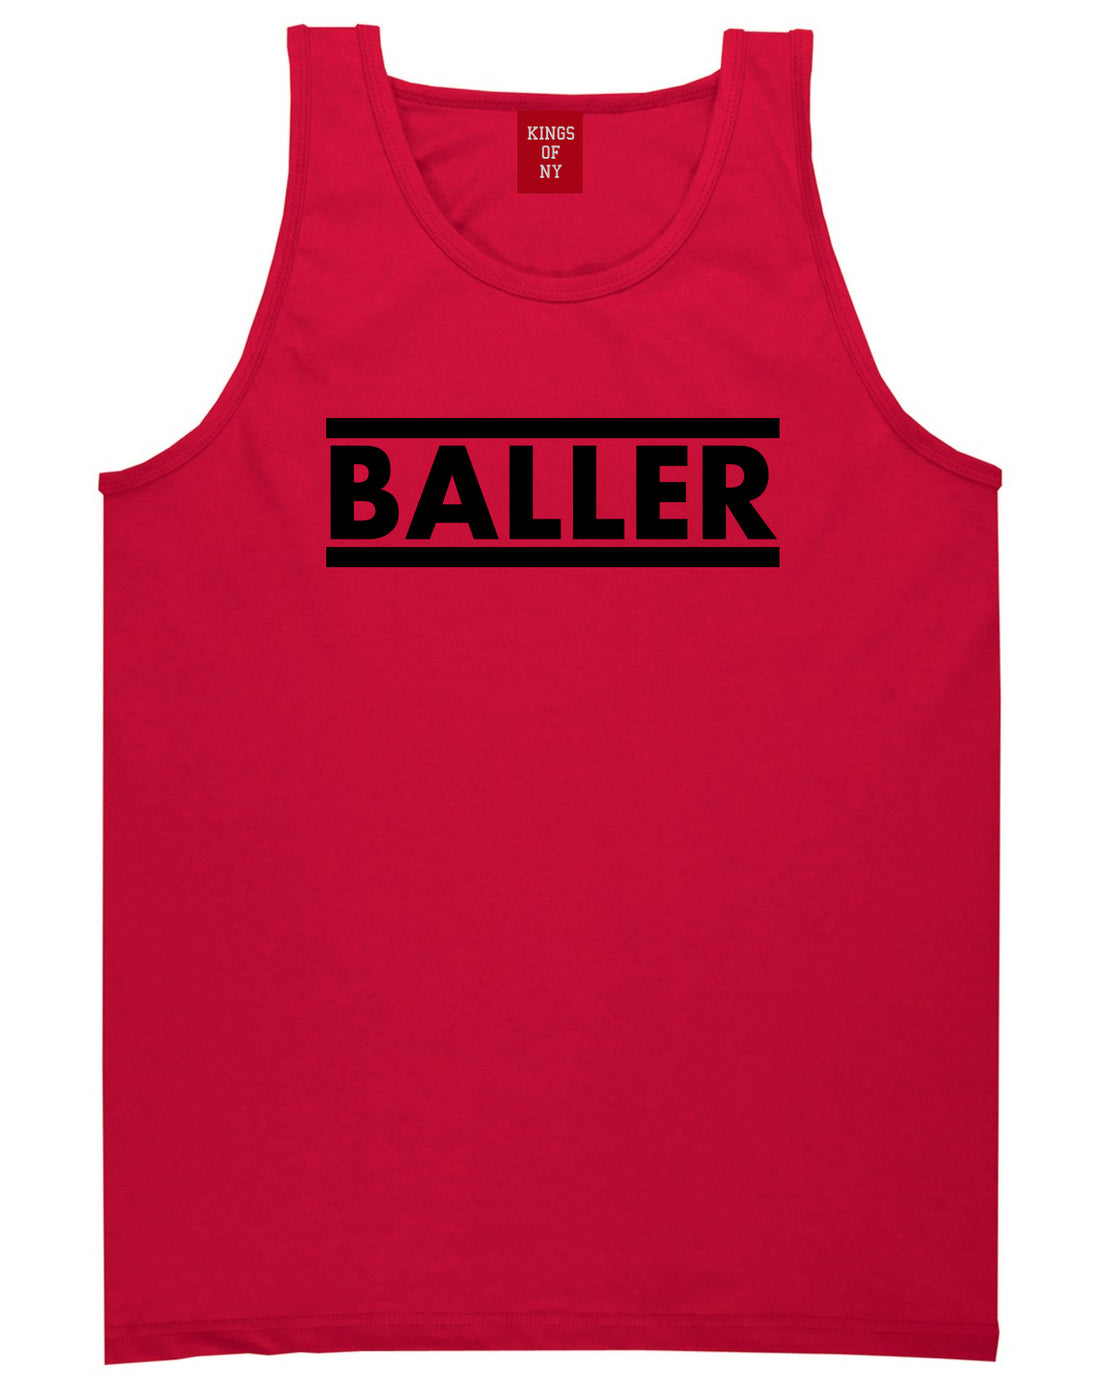 Baller Red Tank Top Shirt by Kings Of NY